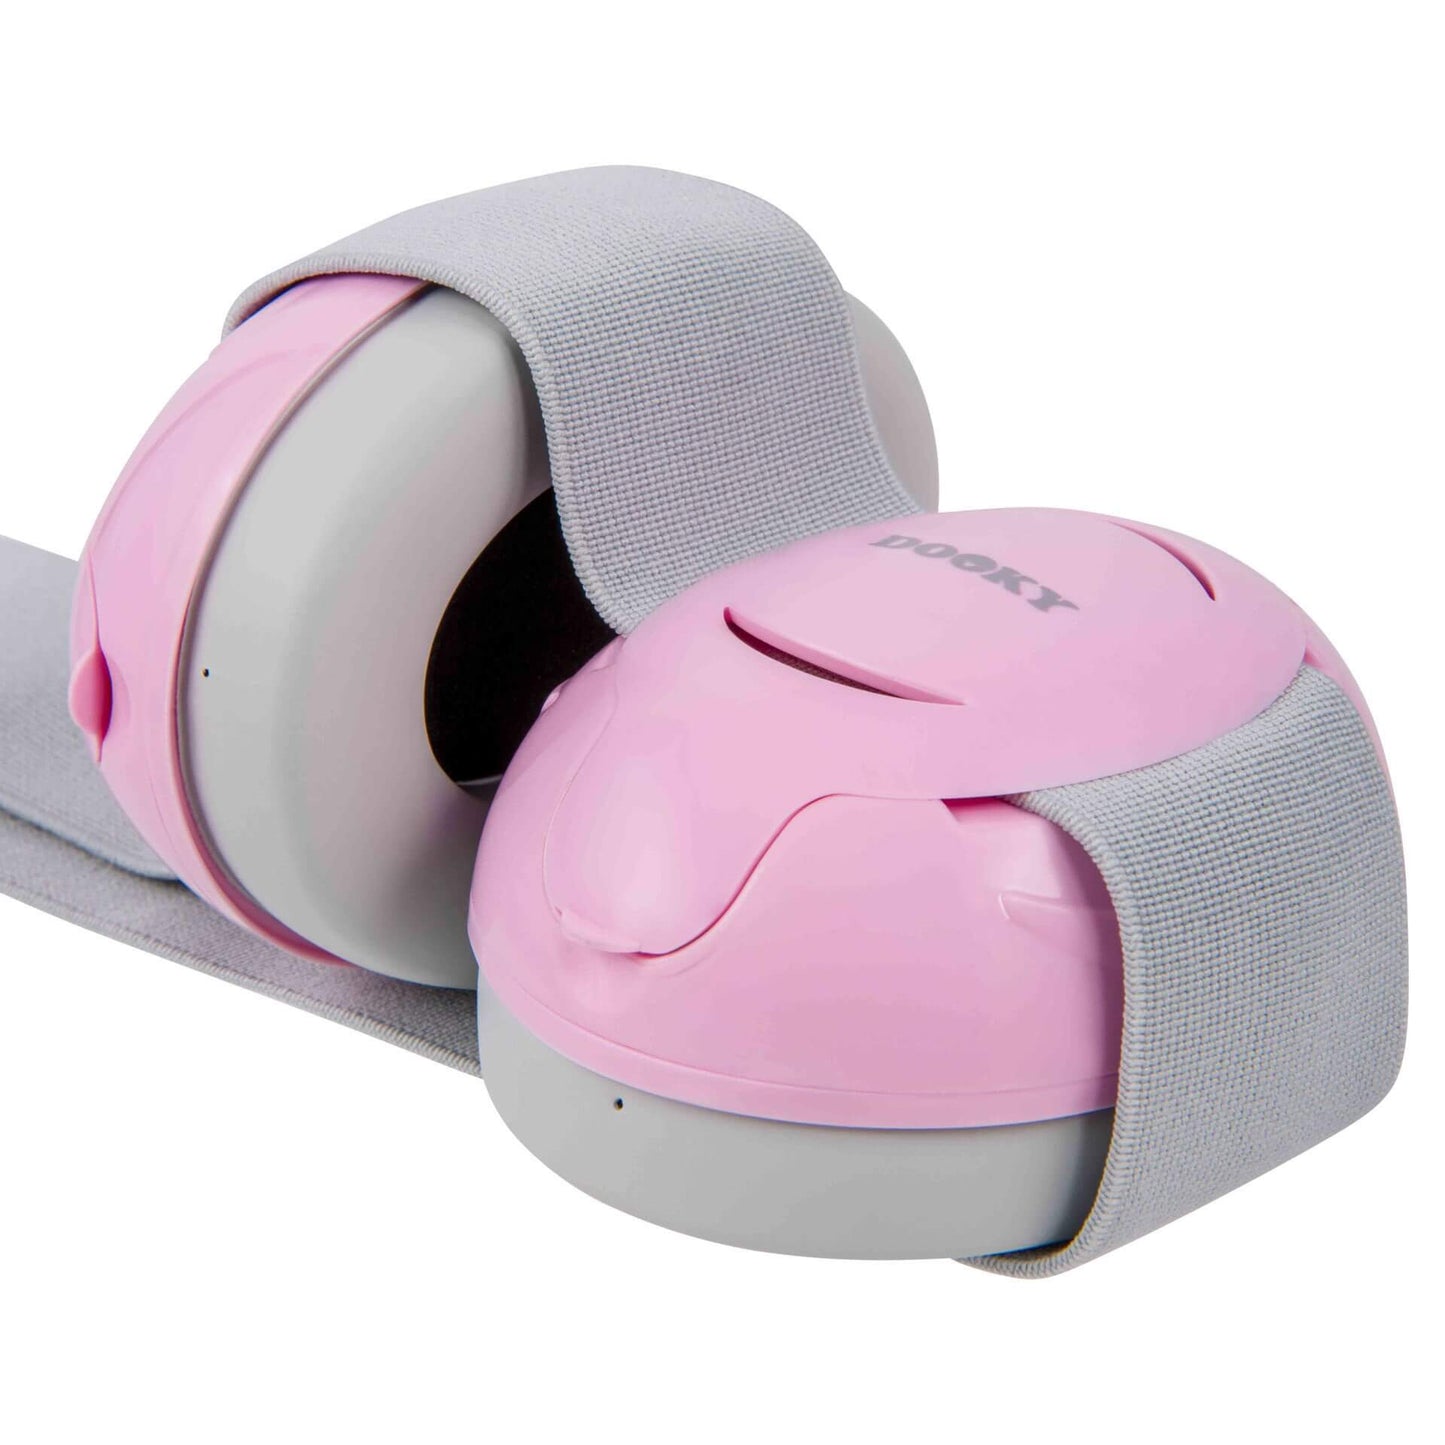 Dooky Baby Ear Protection (Pink)